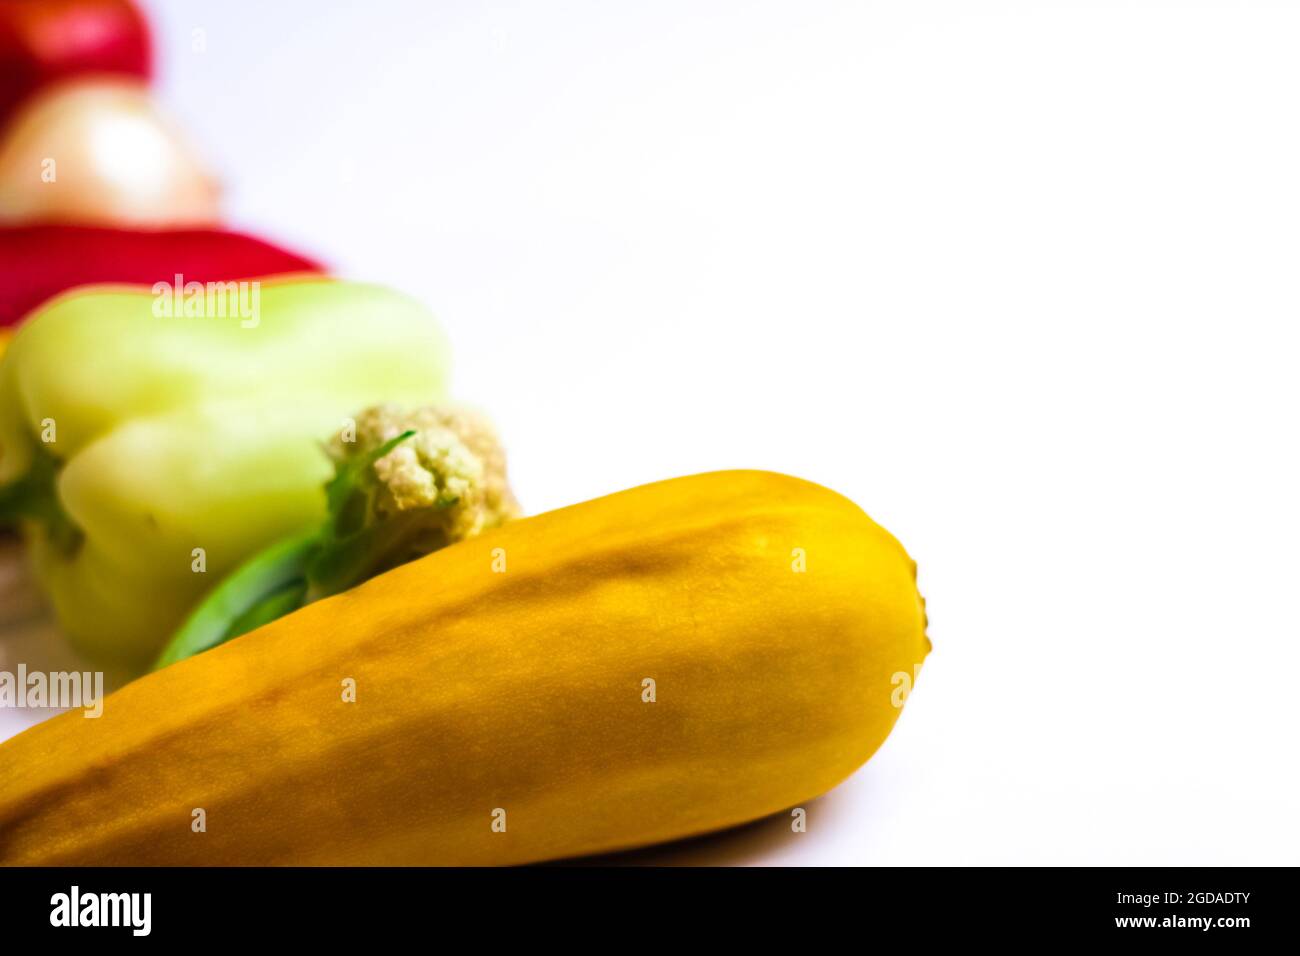 Ripe imperfect squash on blur vegetable background. Autumn still life with variety of colorful vegetables on white background. Happy Thanksgiving. Sel Stock Photo